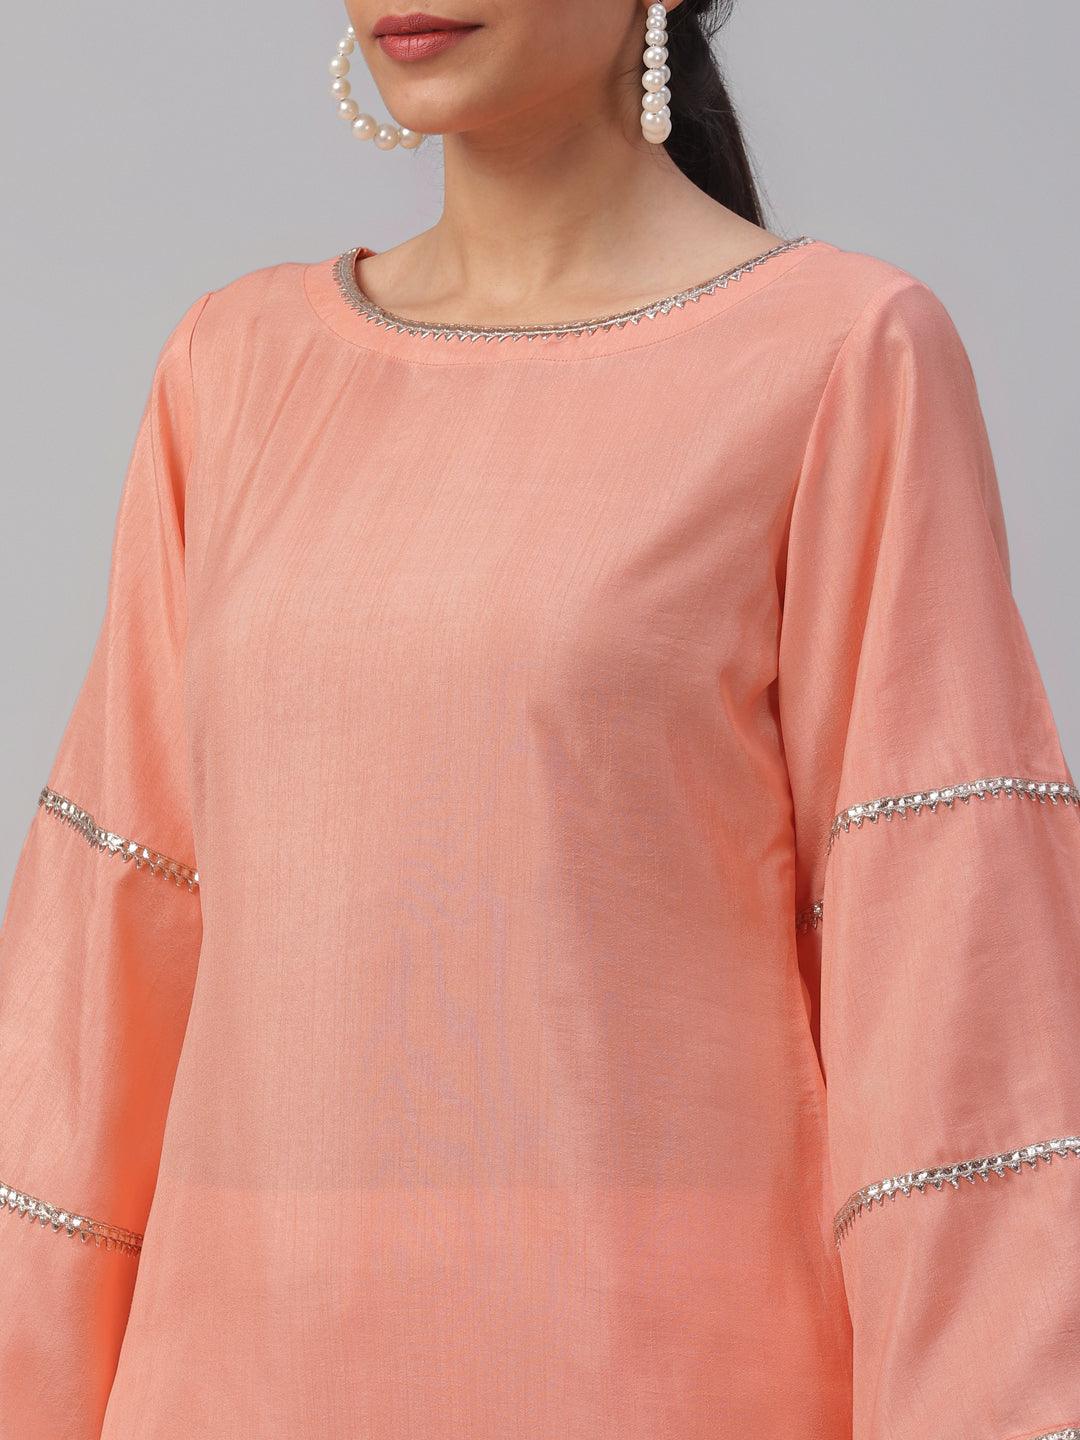 Peach Solid Polyester Suit Set - Libas